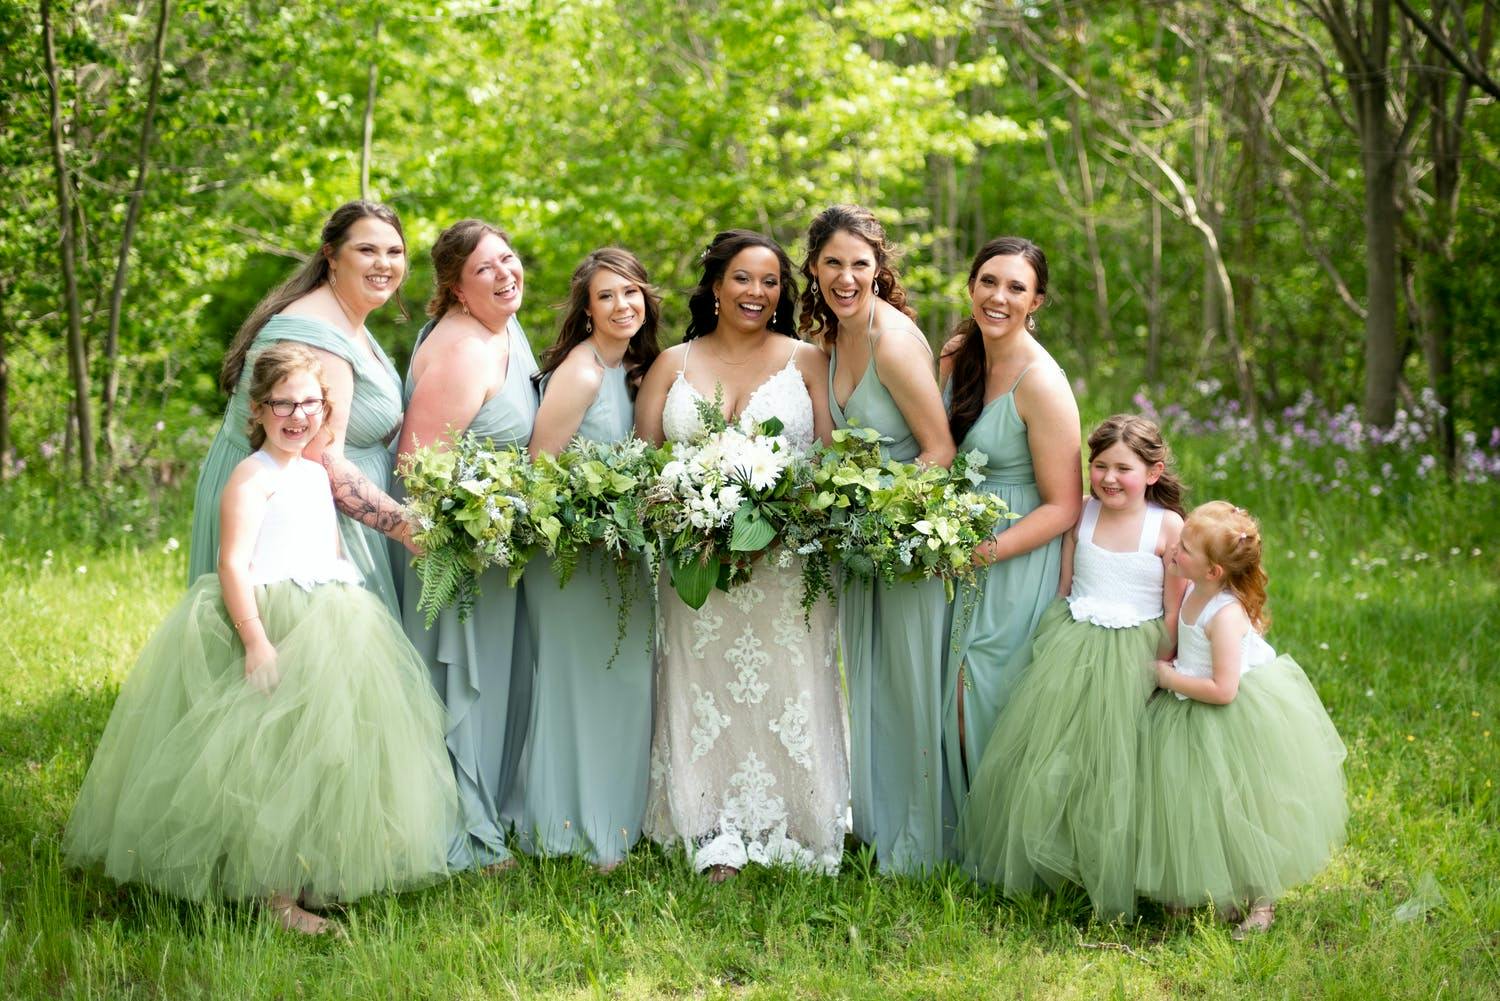 Bridal party in sea foam green and pistachio spring wedding colors | PartySlate